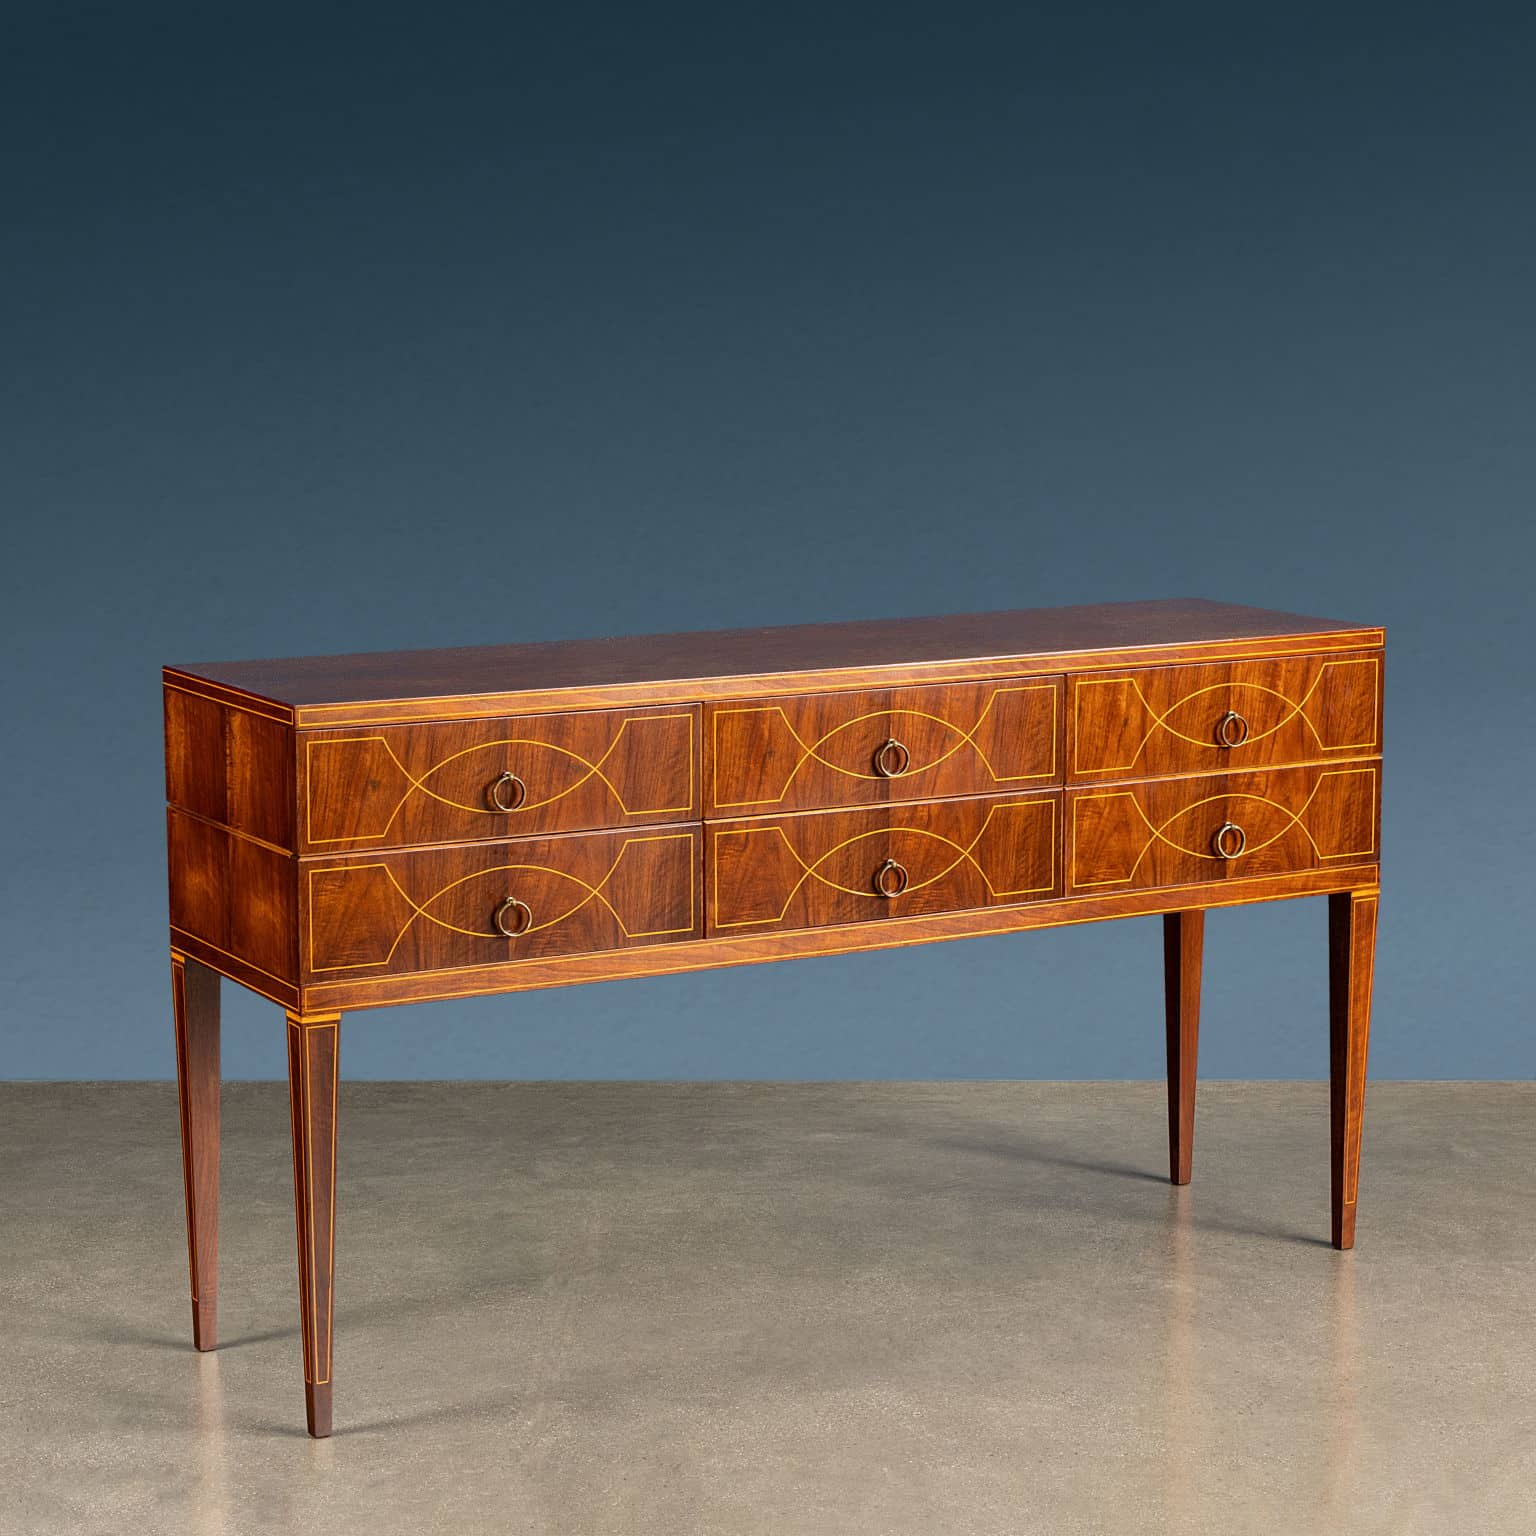 Chest Drawers by Paolo Buffa, 1940s-50s, Manufactured by Mosè Turri (Bovisio)